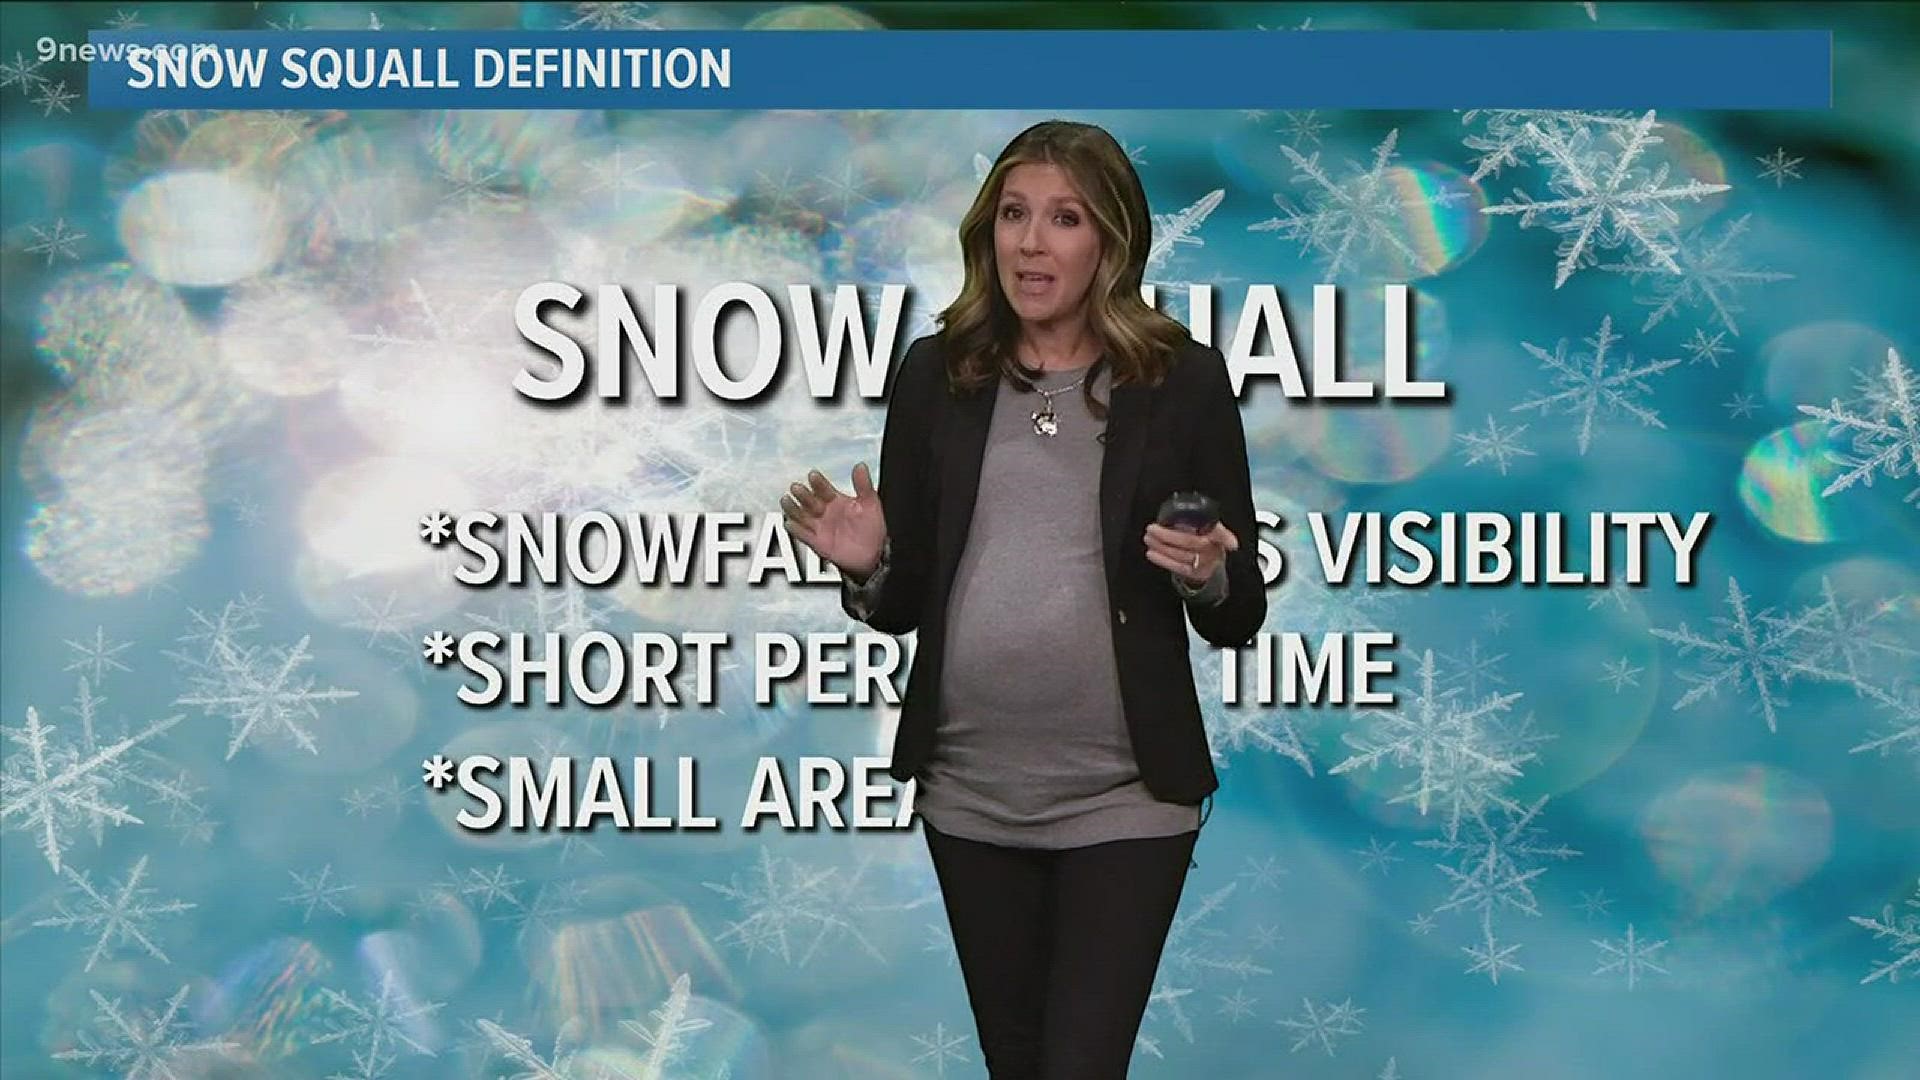 Snow was in the forecast with 2 inches falling out at DIA, but those icy and snowy conditions may have contributed to a big pile-up involving 49 cars on Saturday. The sudden onset of heavy snow and ice can cause drivers to lose control quickly.  Meteorologist Becky Ditchfield explains what this type of storm is called and the warnings that may accompany it in the future.